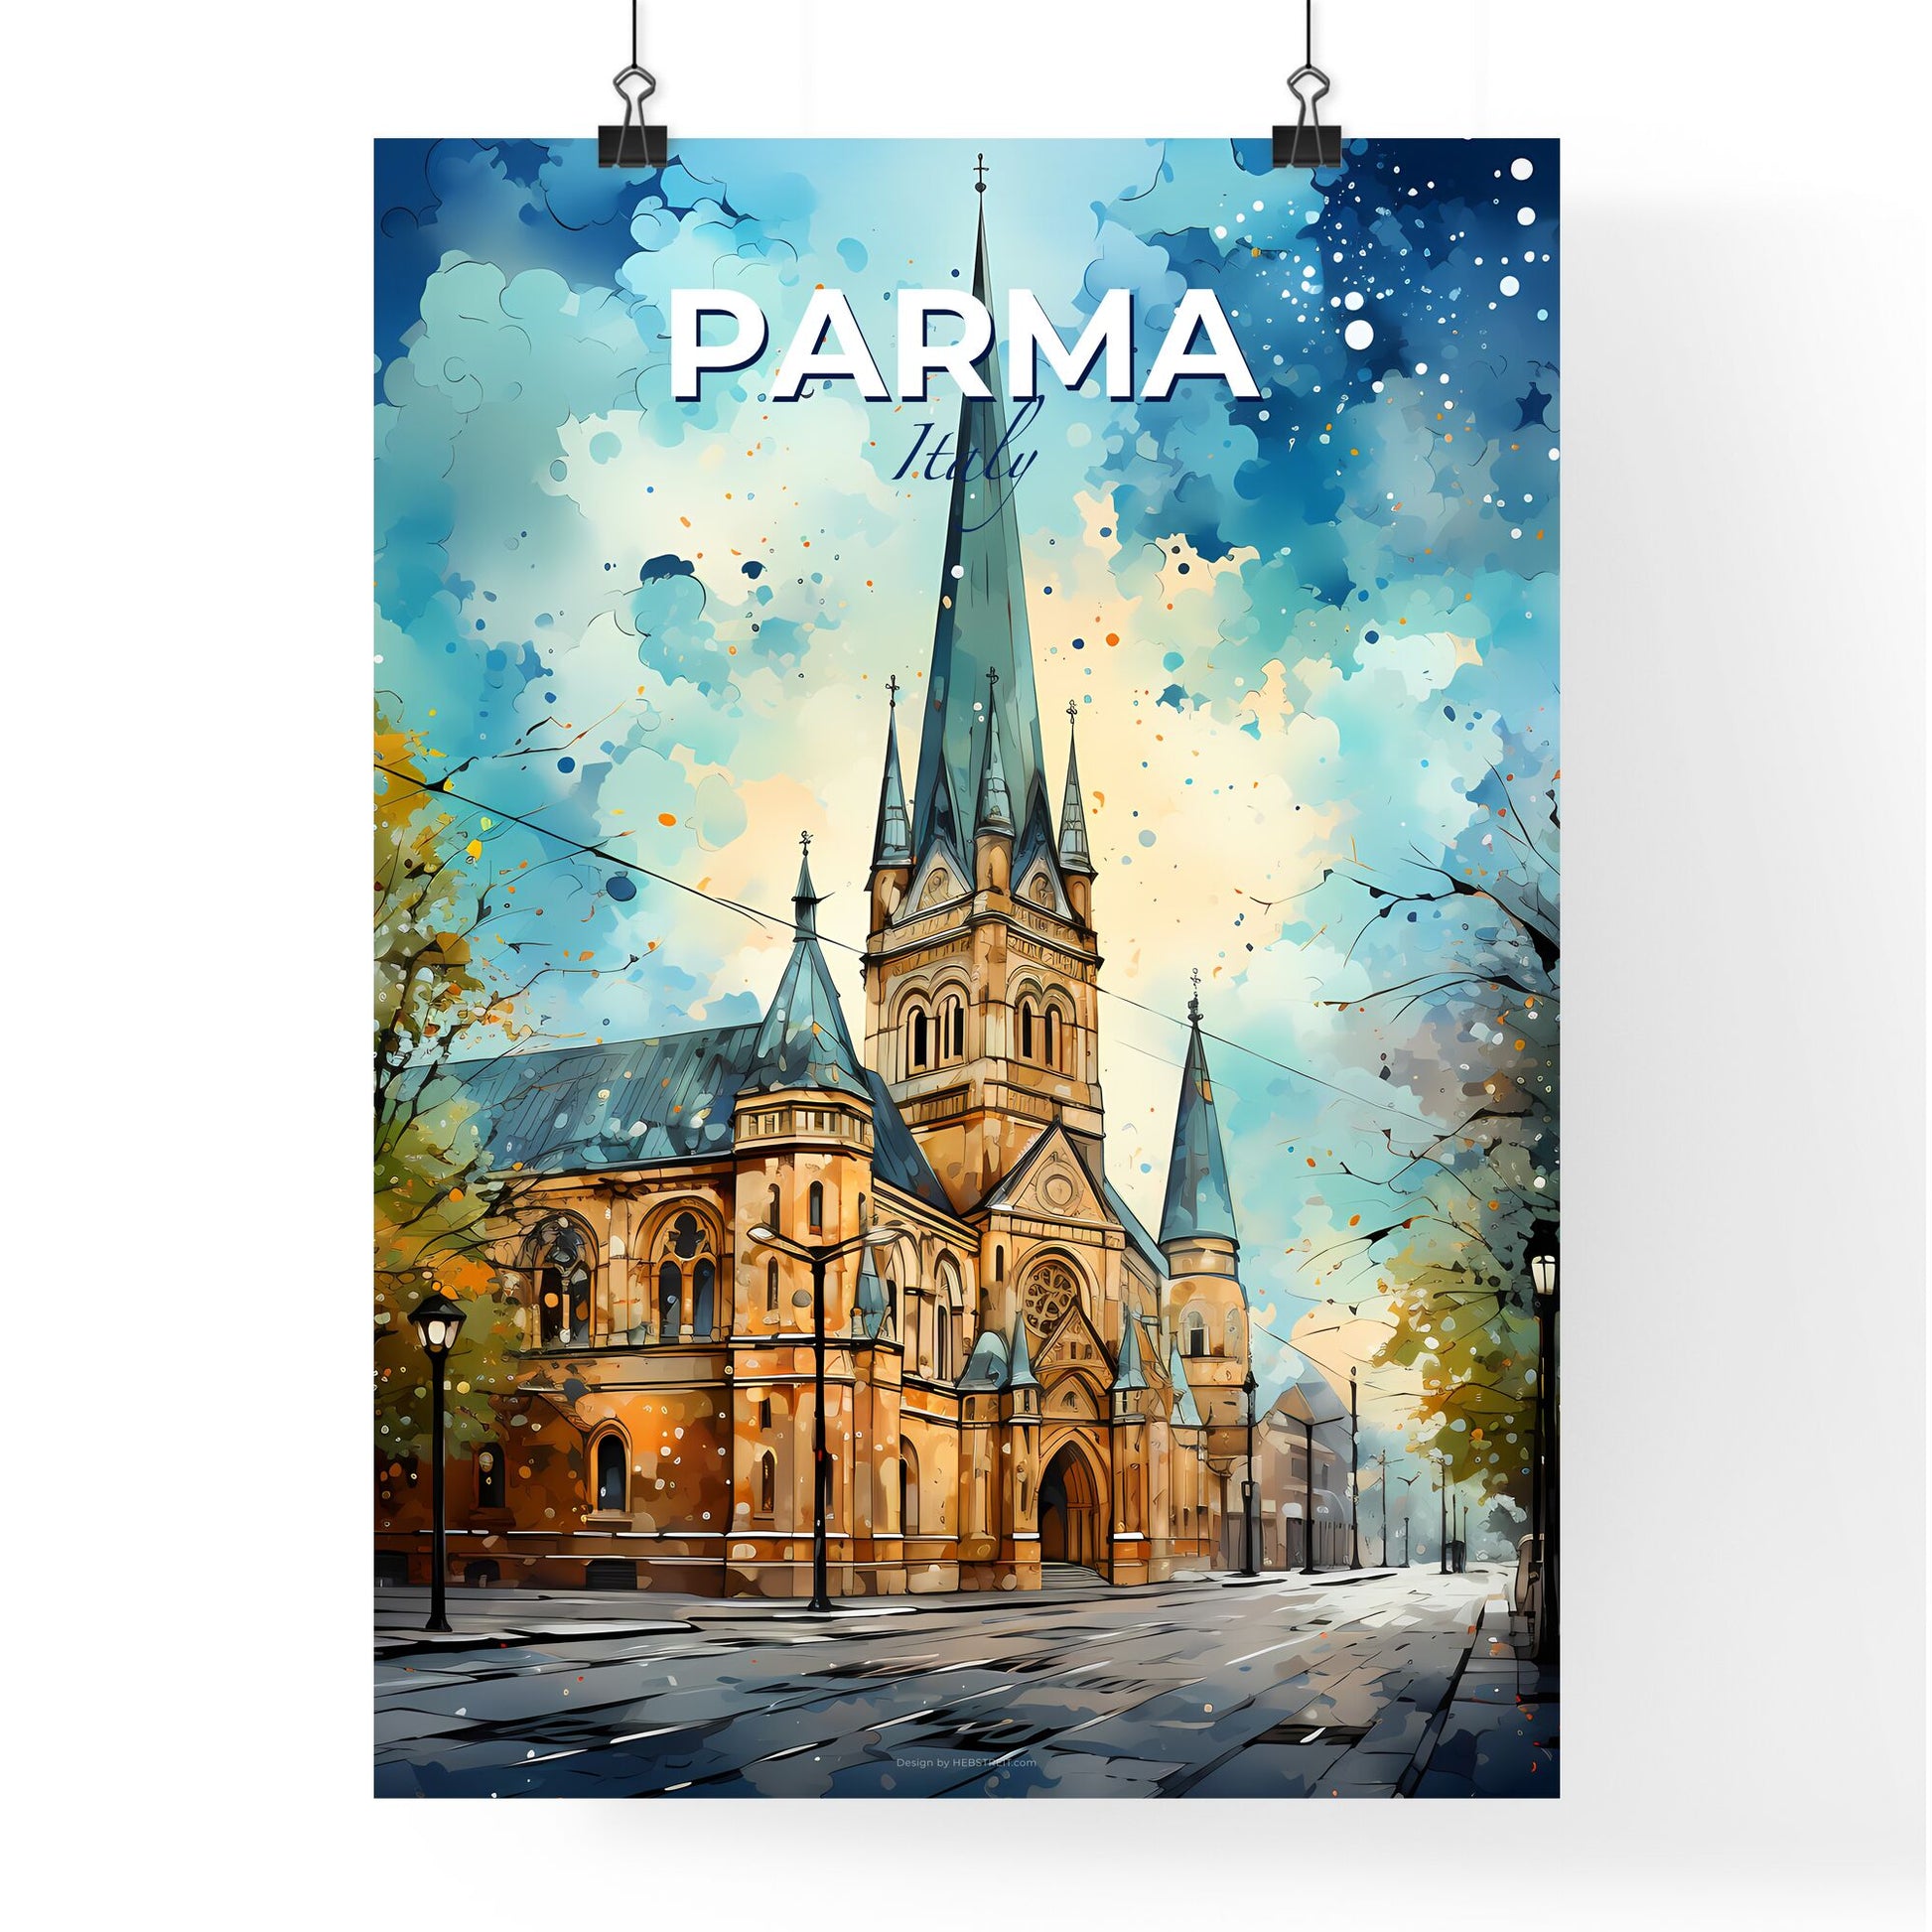 Parma, Italy, A Poster of a painting of a church Default Title